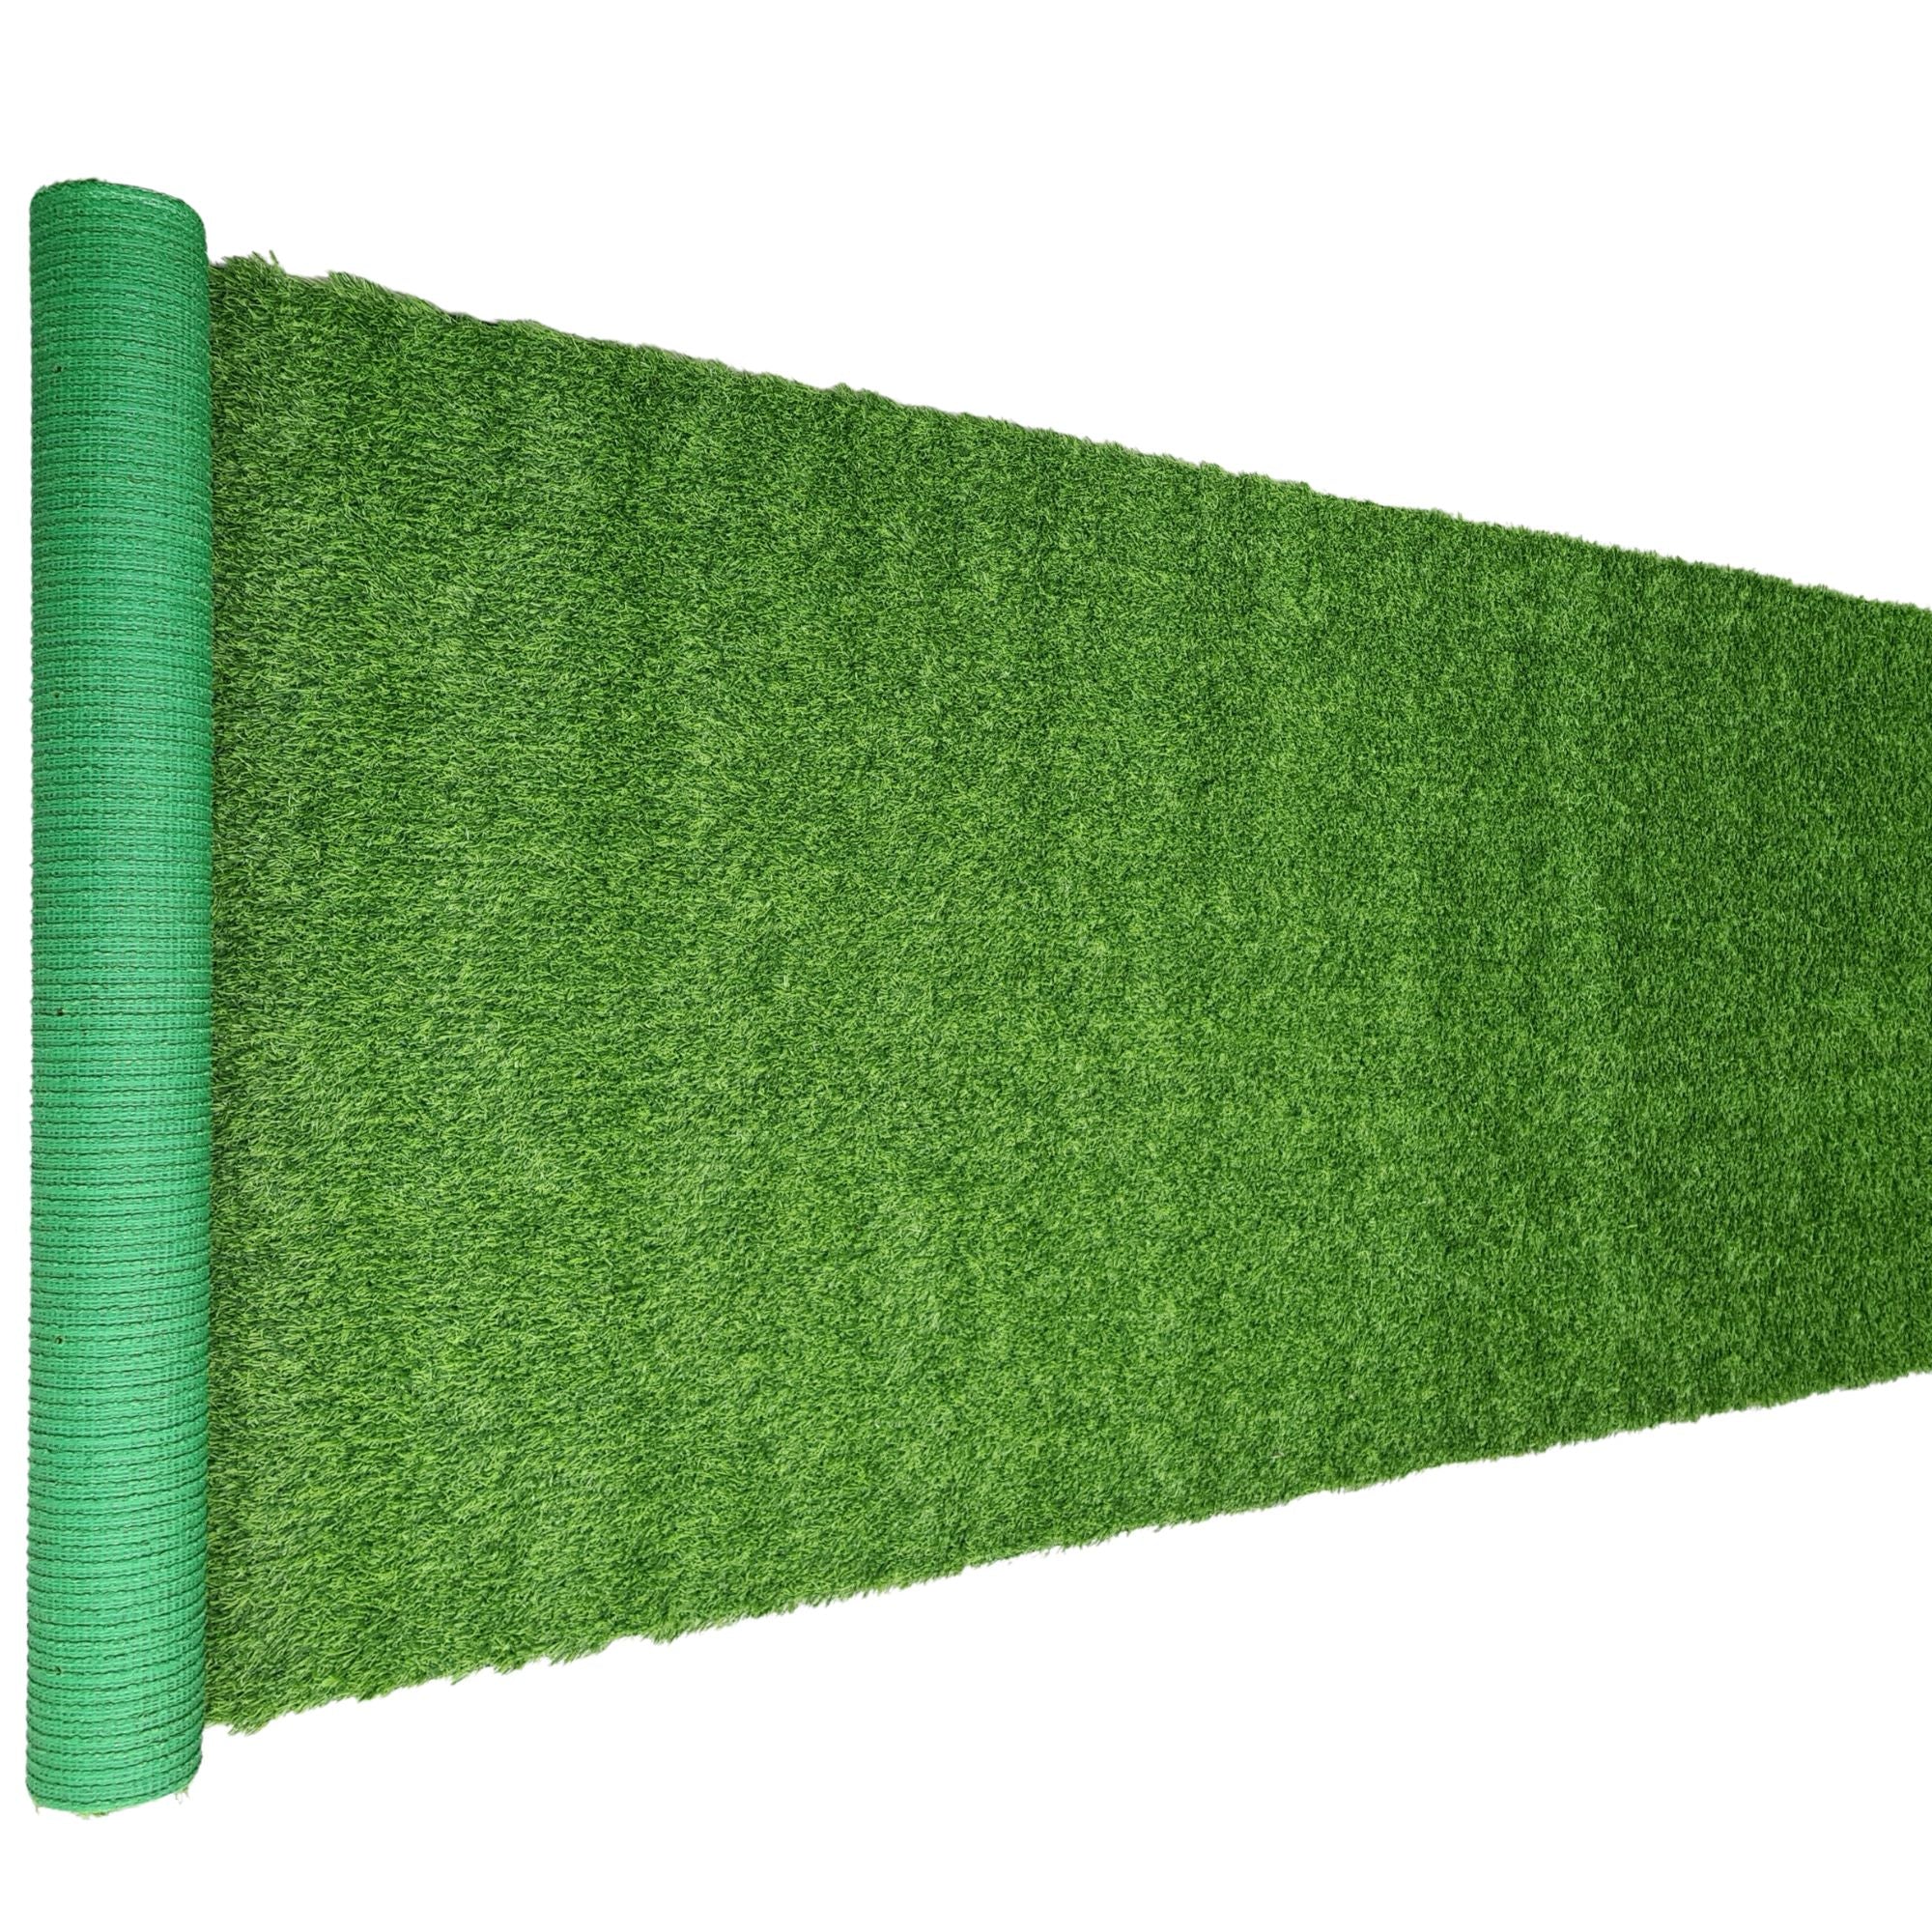 Landscape Series Artificial Grass Roll (Synthetic Grass DIY Turf) Green Backing 3m X 1m - Designer Vertical Gardens Artificial vertical garden wall panel expandable trellis